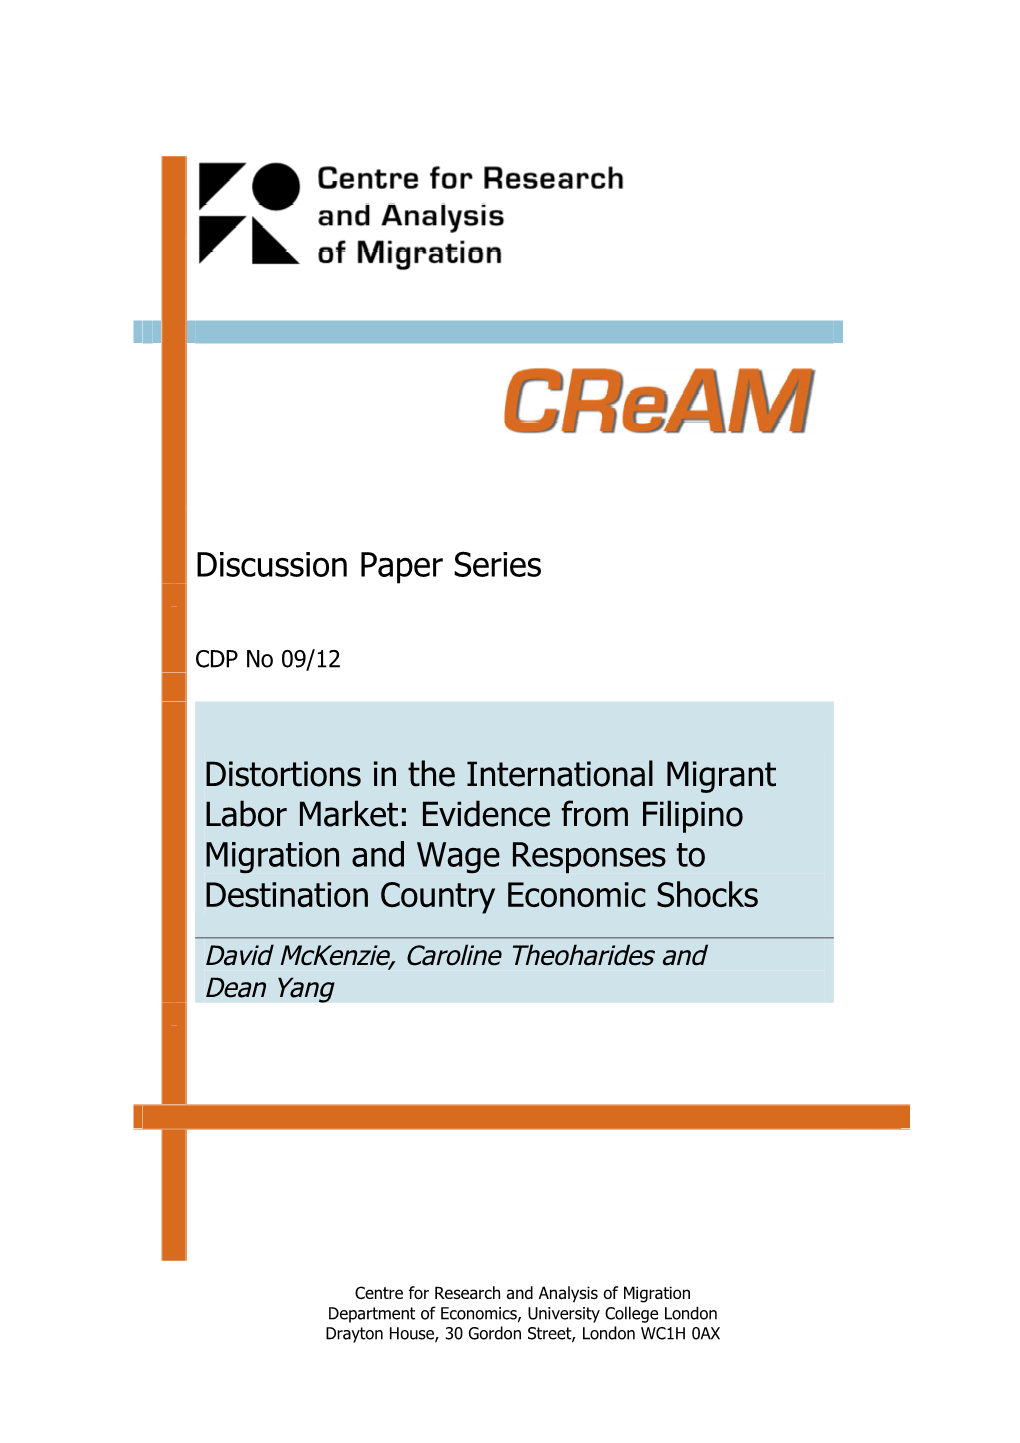 Distortions in the International Migrant Labor Market: Evidence from Filipino Migration and Wage Responses to Destination Country Economic Shocks